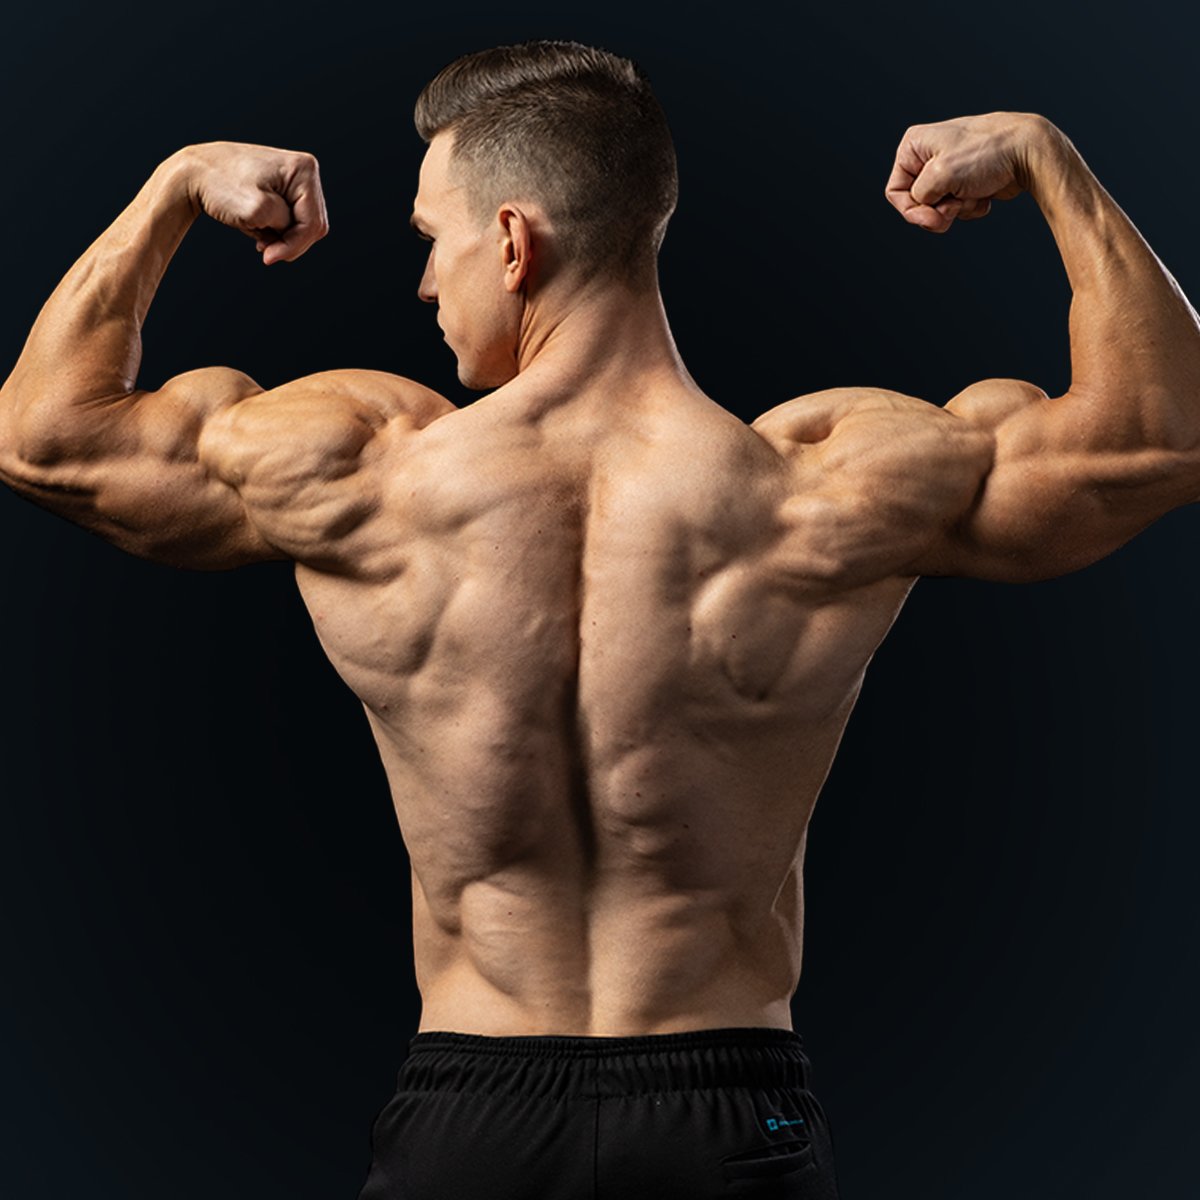 basic bodybulding 3000 calorie diet Is Essential For Your Success. Read This To Find Out Why